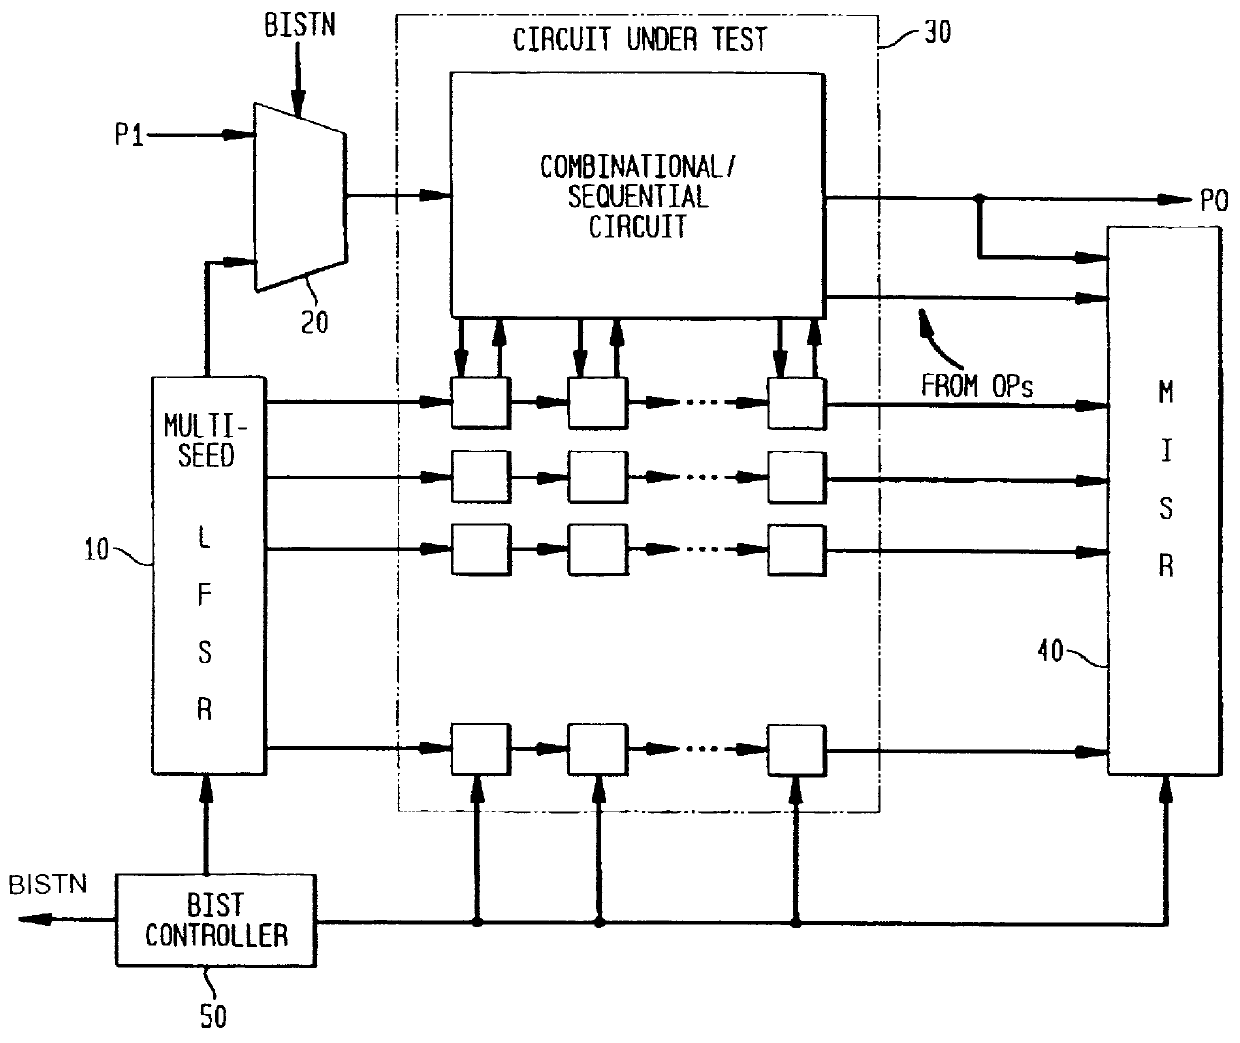 Bist architecture for detecting path-delay faults in a sequential circuit